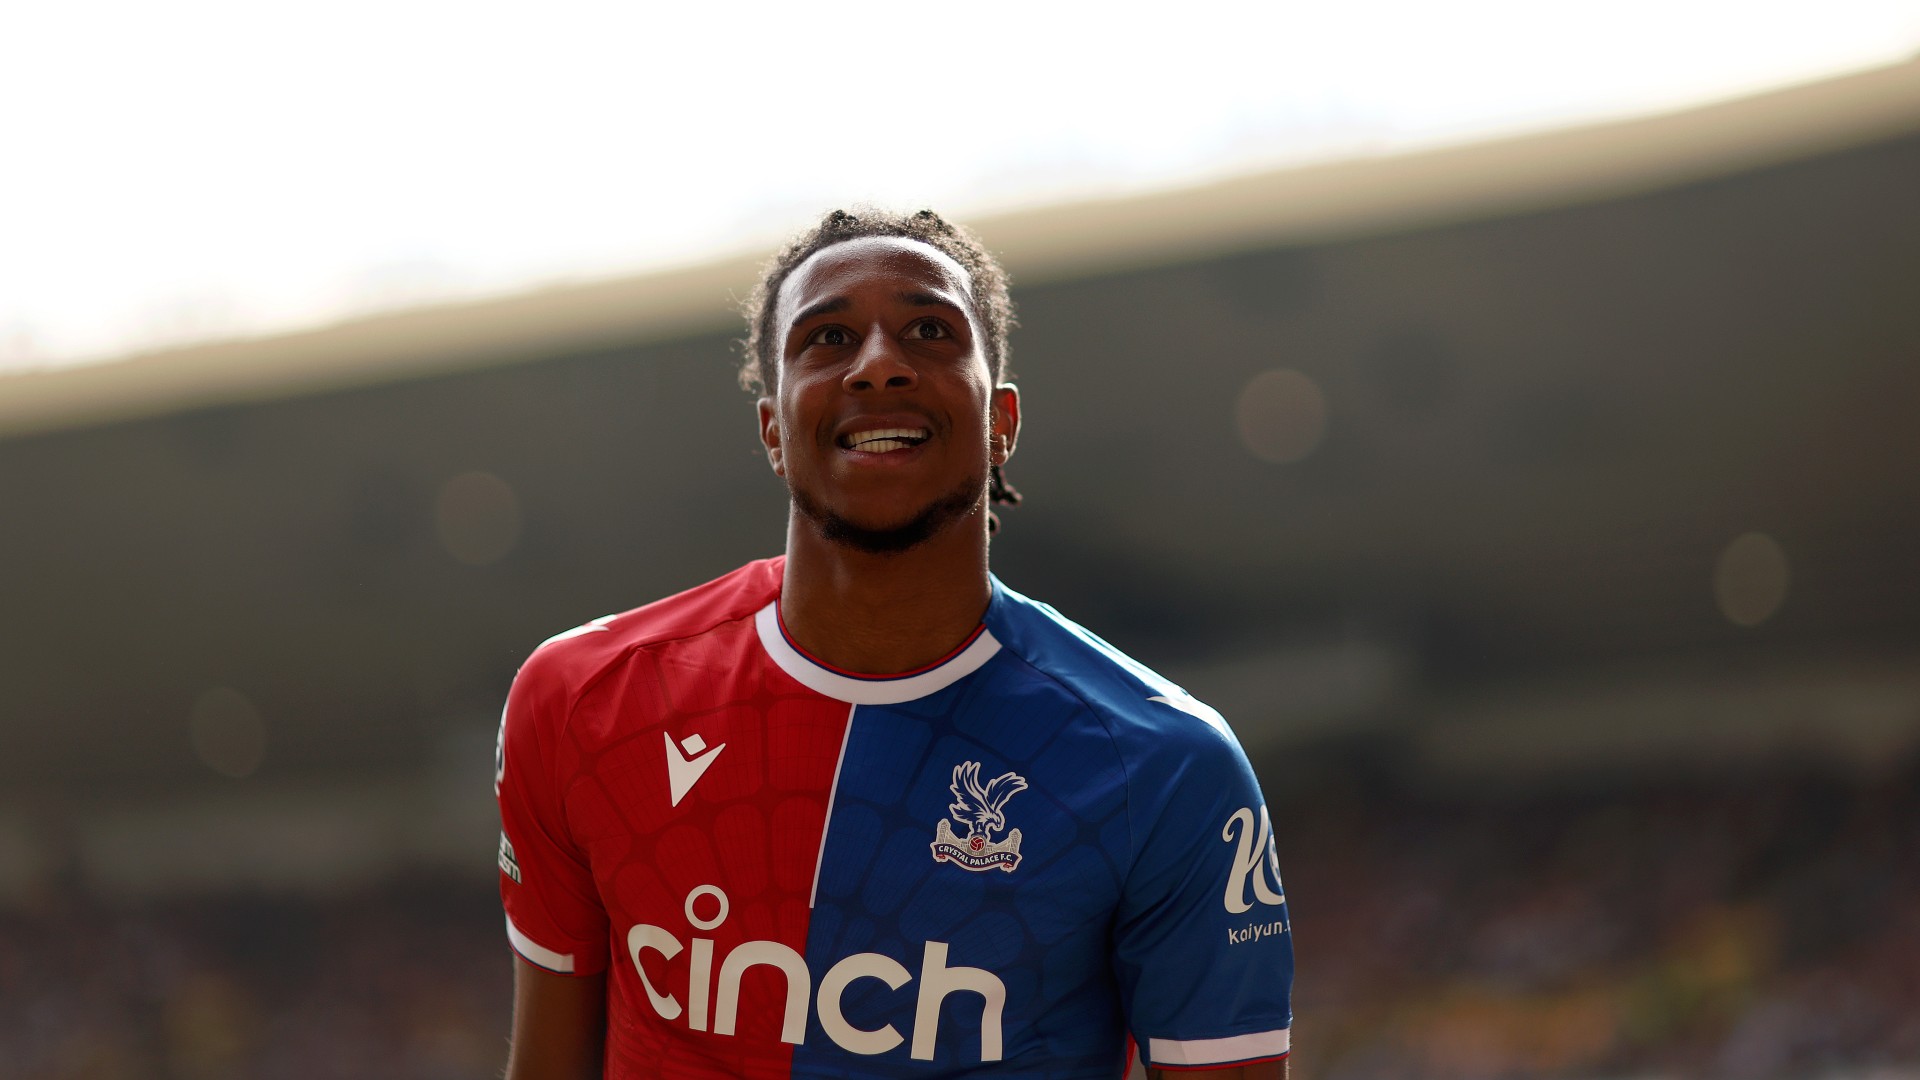 Palace lucky to have 'crazy' Olise